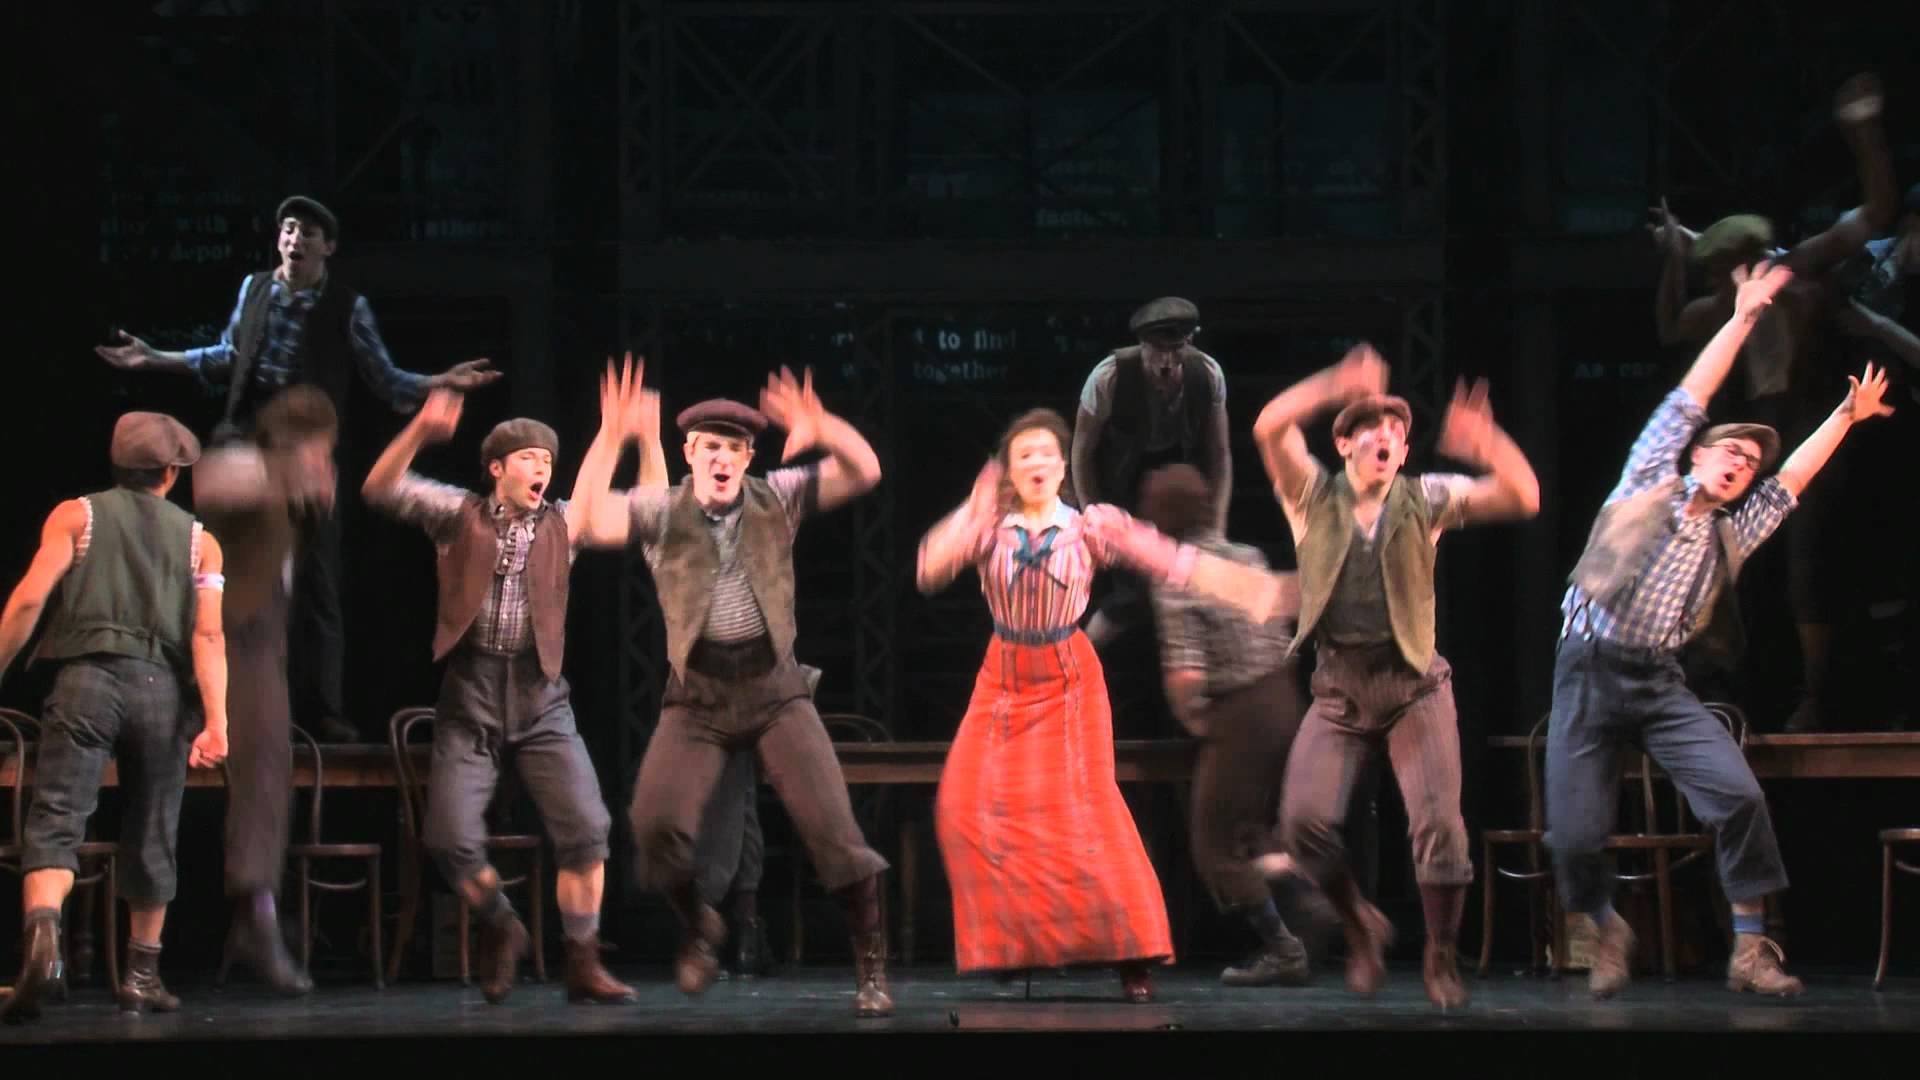 Watch a clip of "King of New York" from the original Broadway cast of...